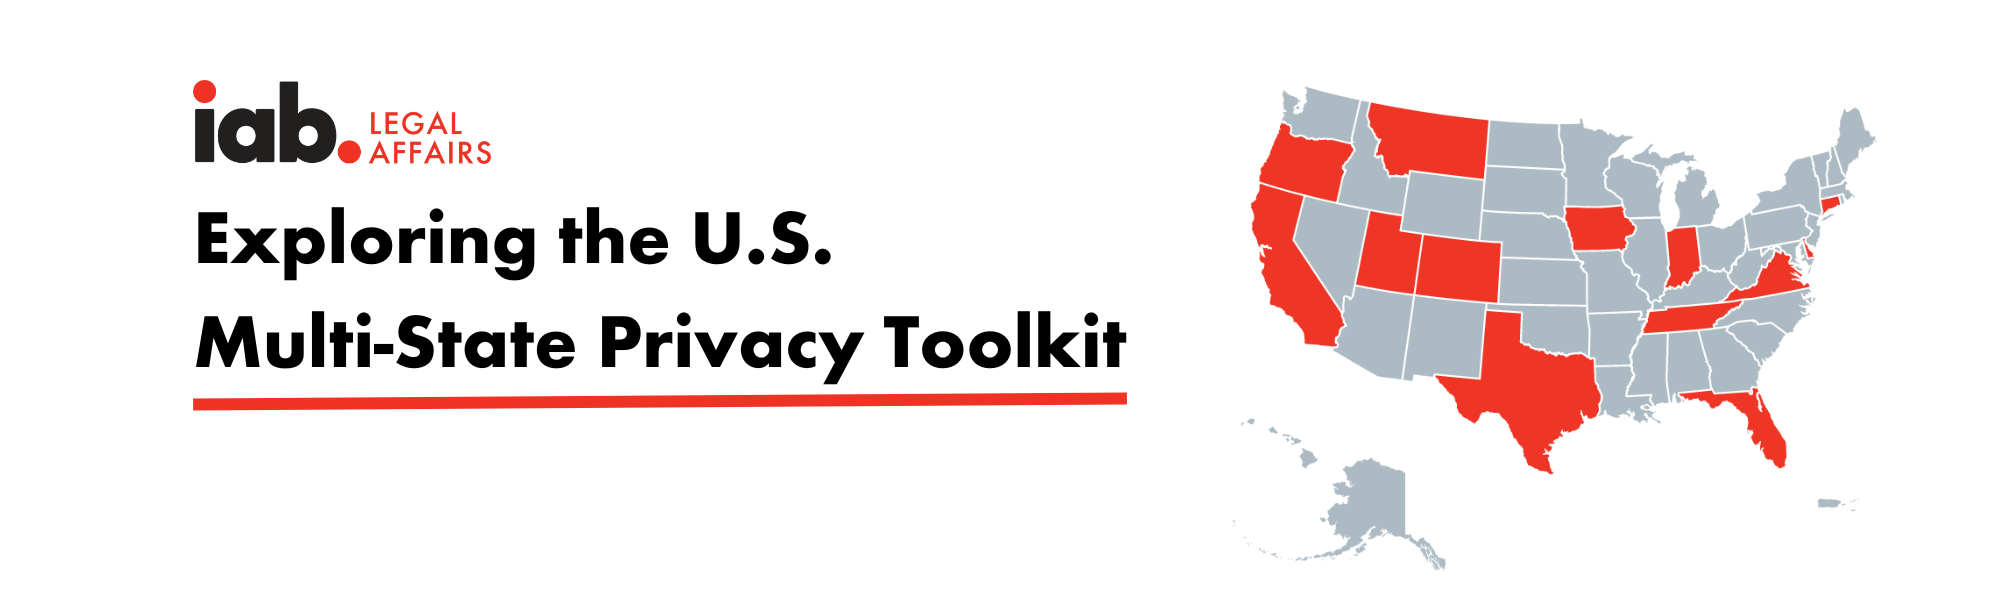 Exploring the U.S. Multi-State Privacy Toolkit